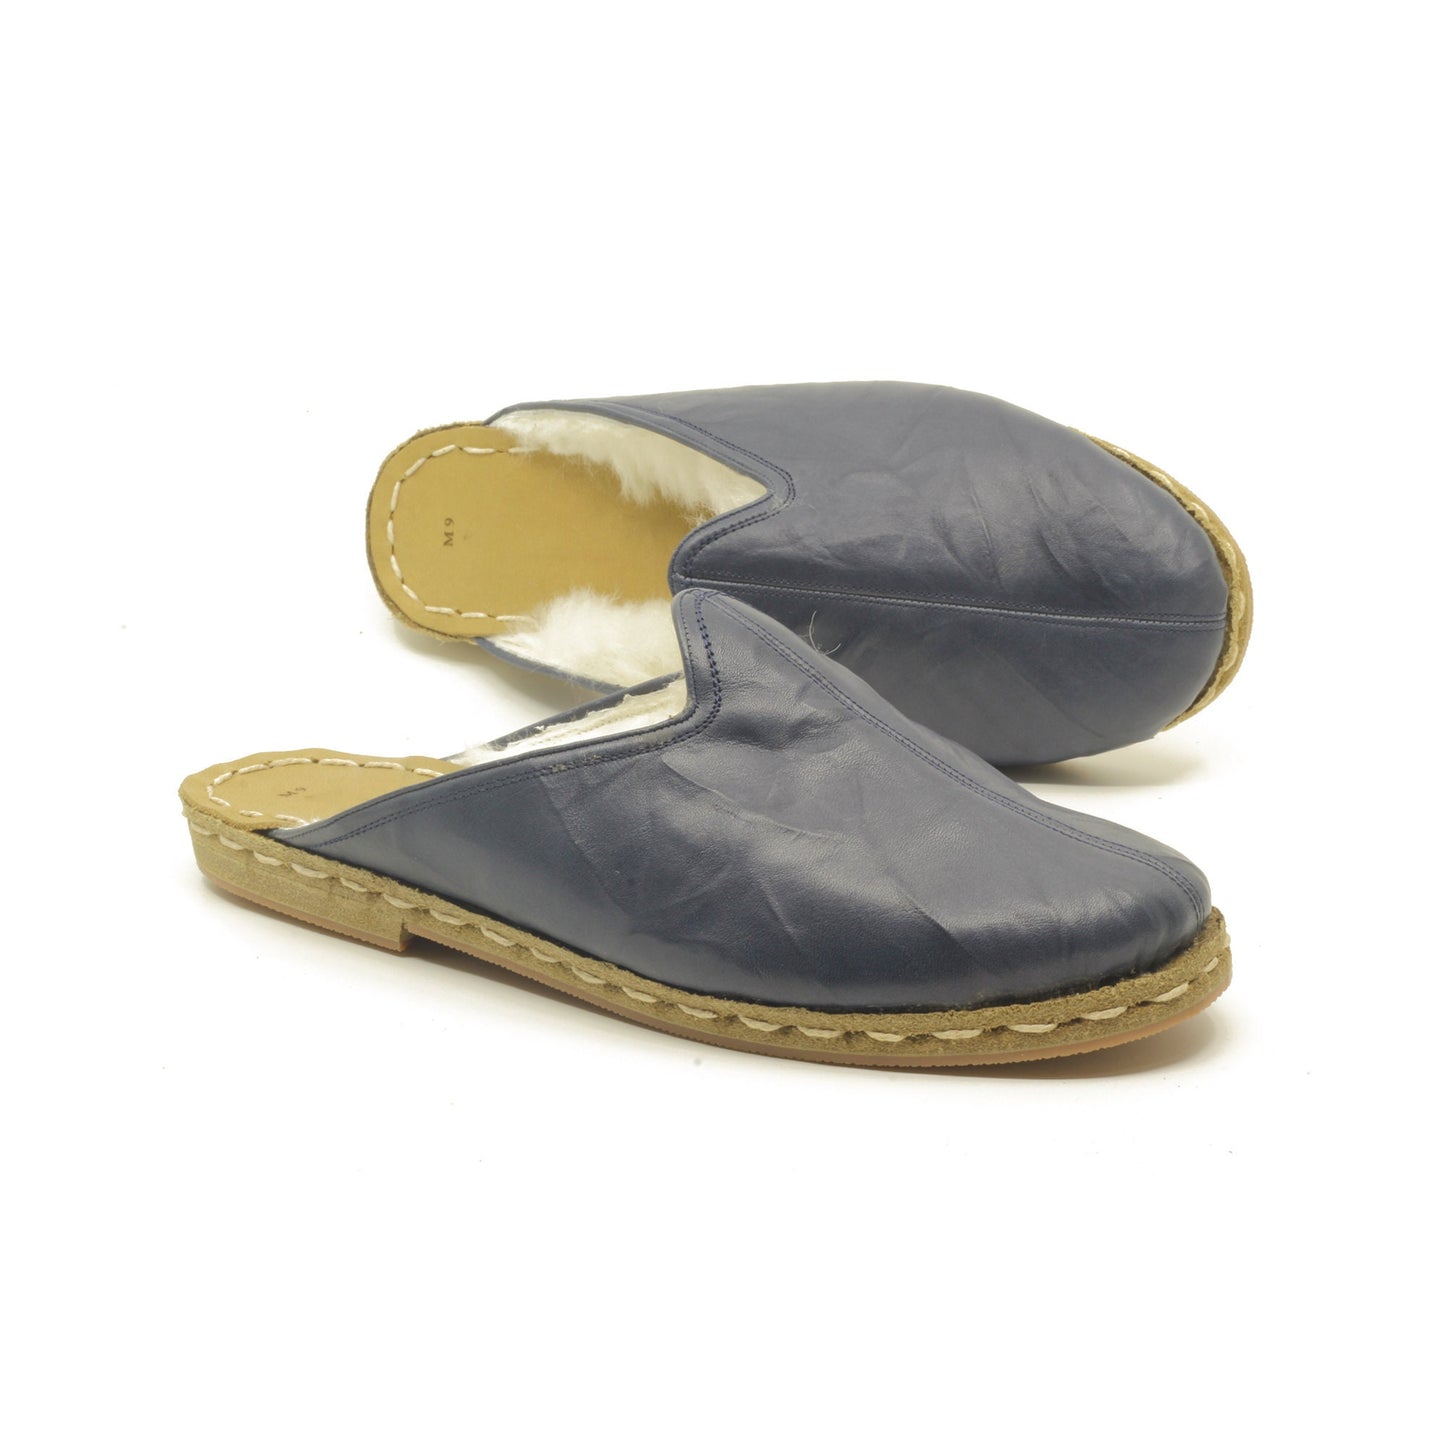 men's slippers handmade tuscan furry navy blue genuine leather outdoor spring summer – nefesshoes